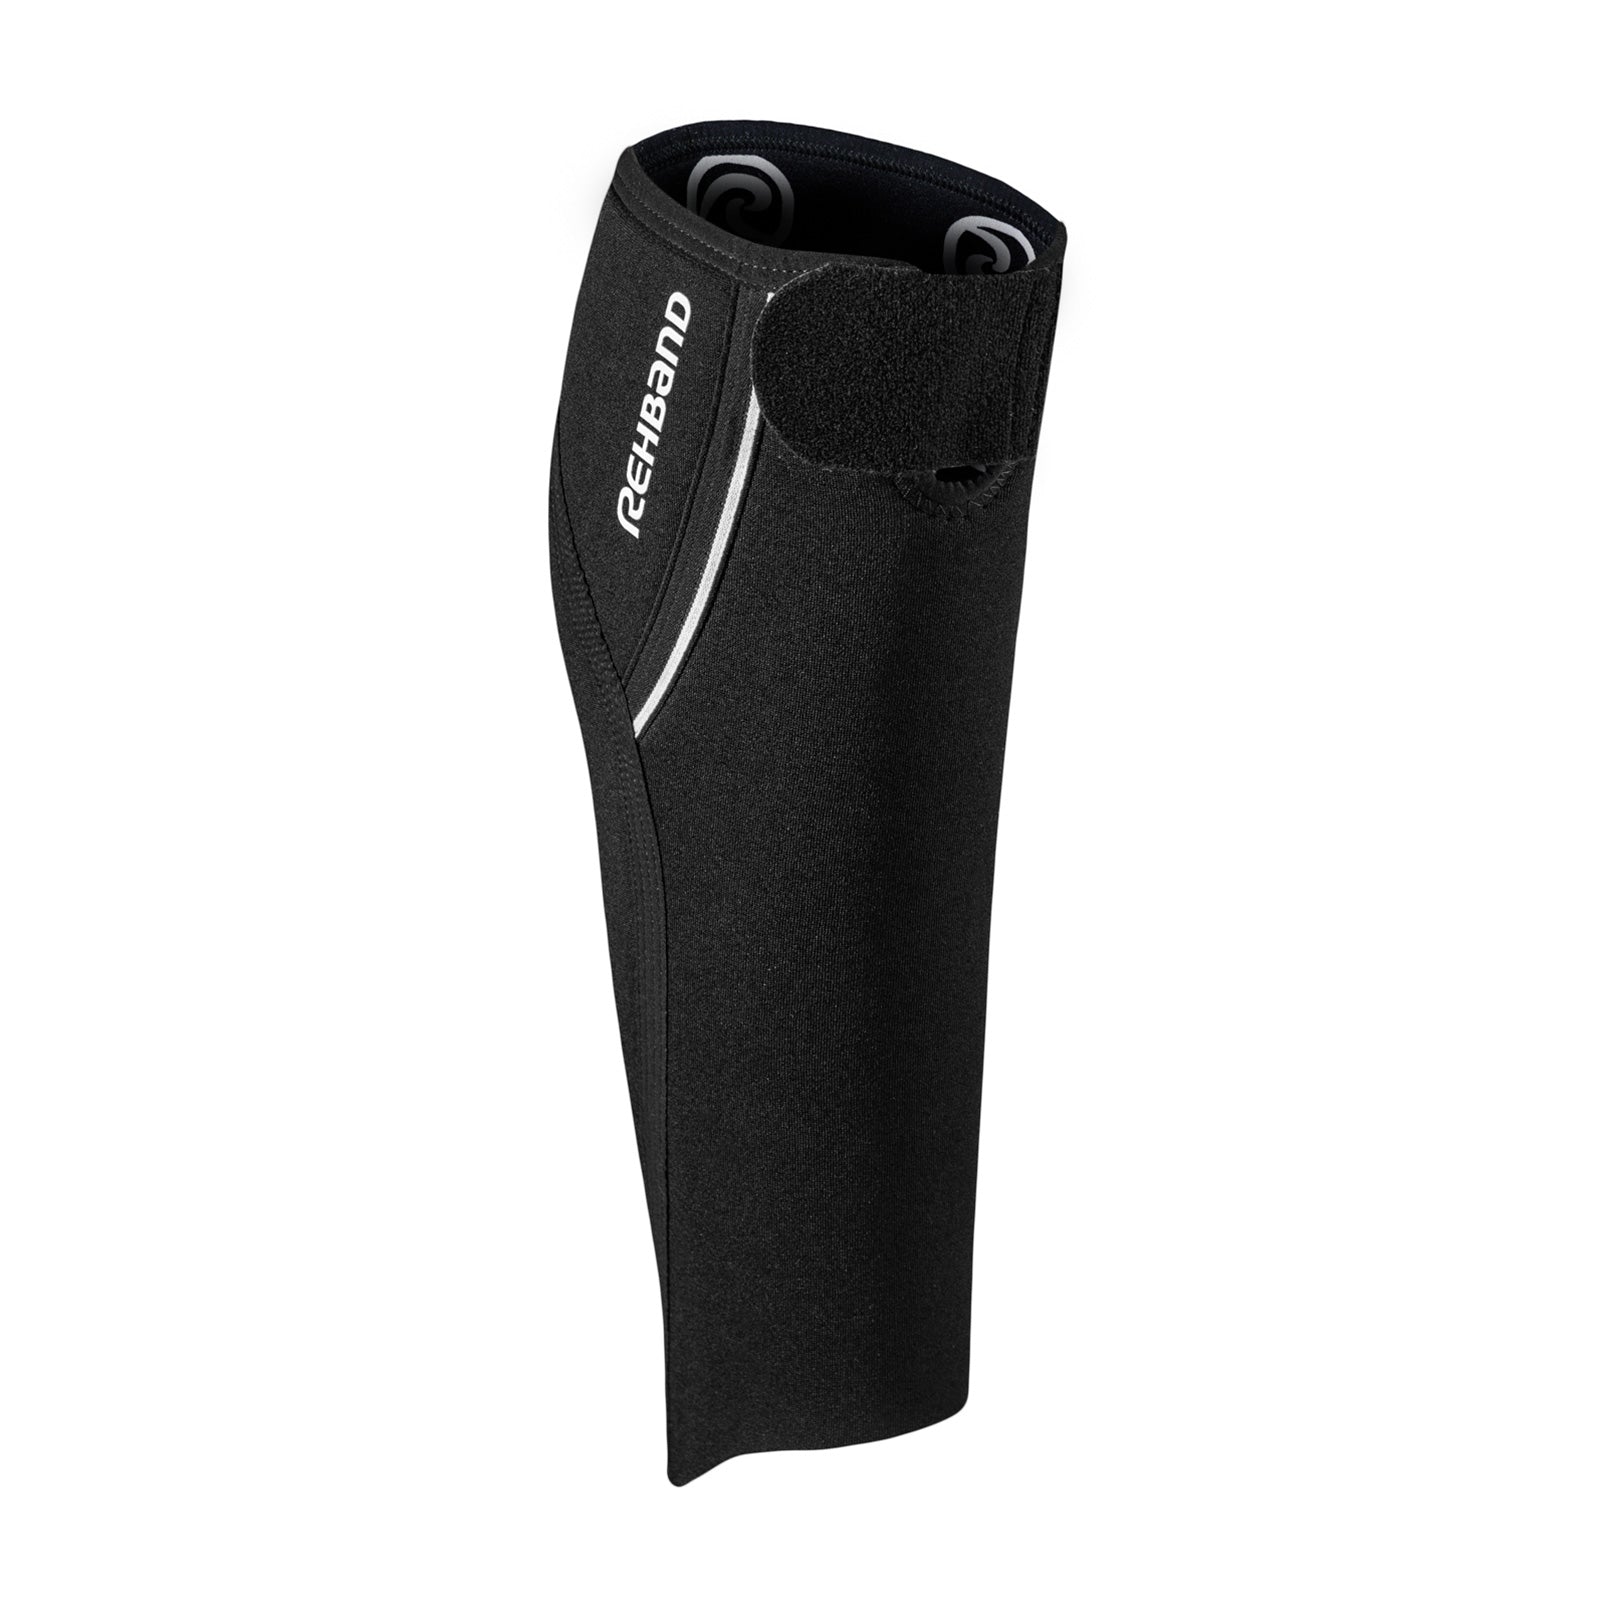 A black shin & calf sleeve with a white Rehband lettering on the side and a fastener on the top